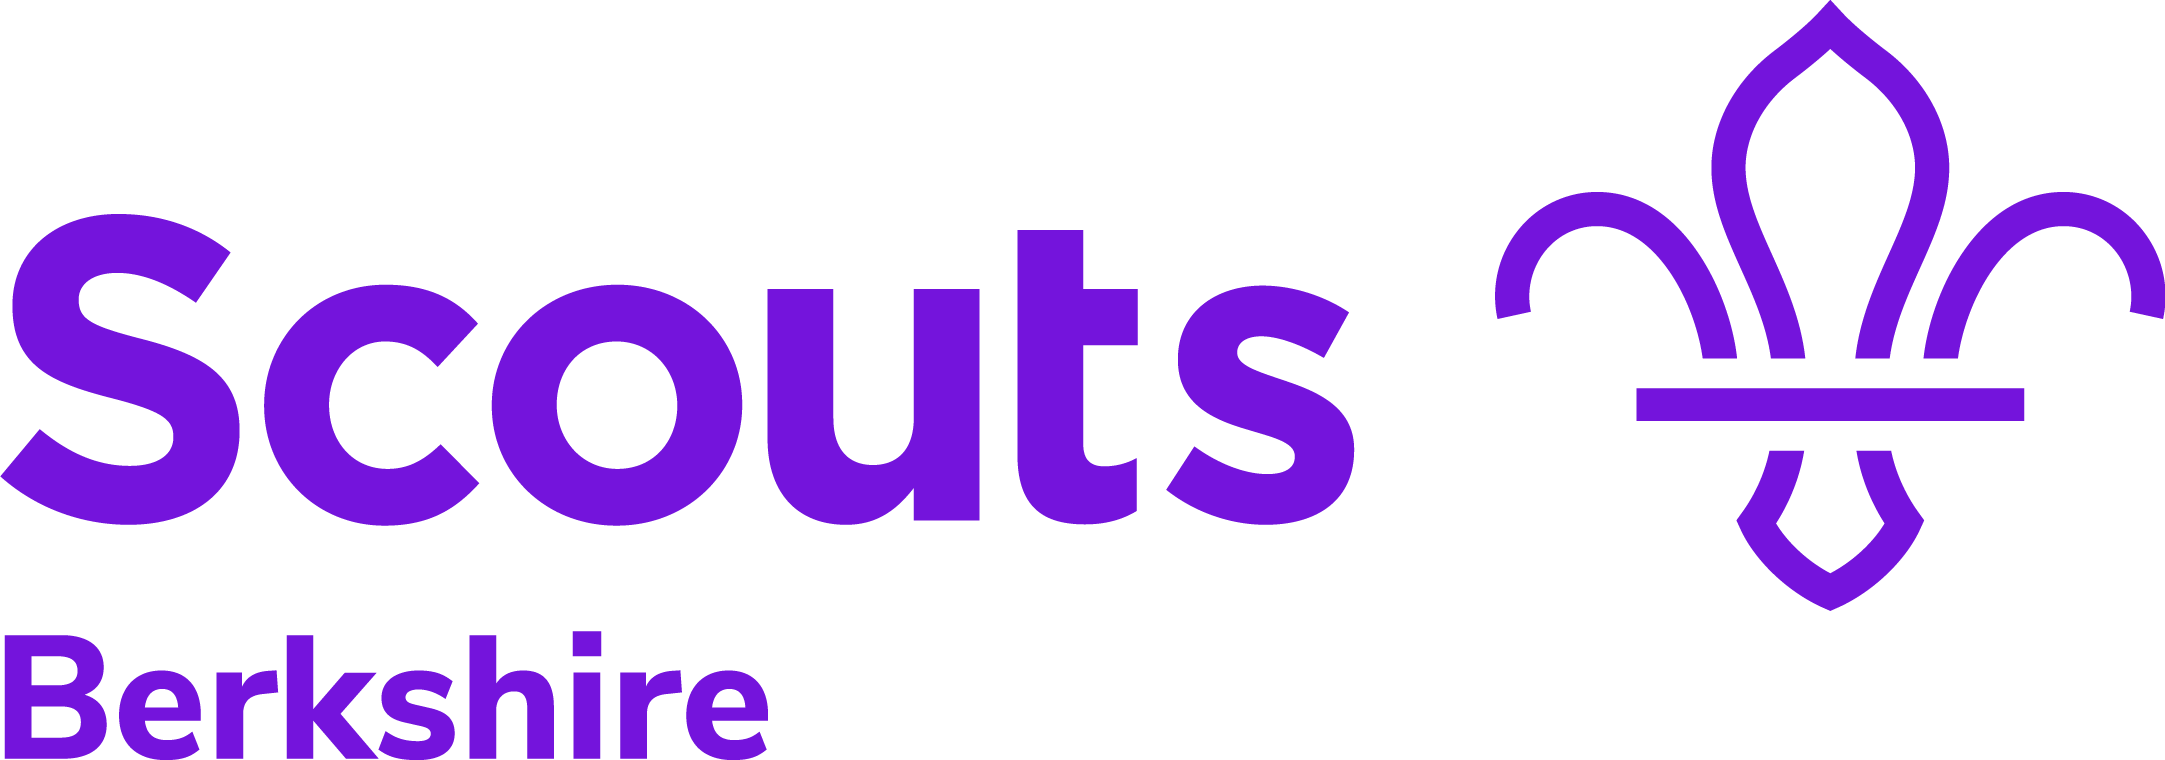 Berkshire Logo - Berkshire Scouts – Even better Scouting for even more Young People